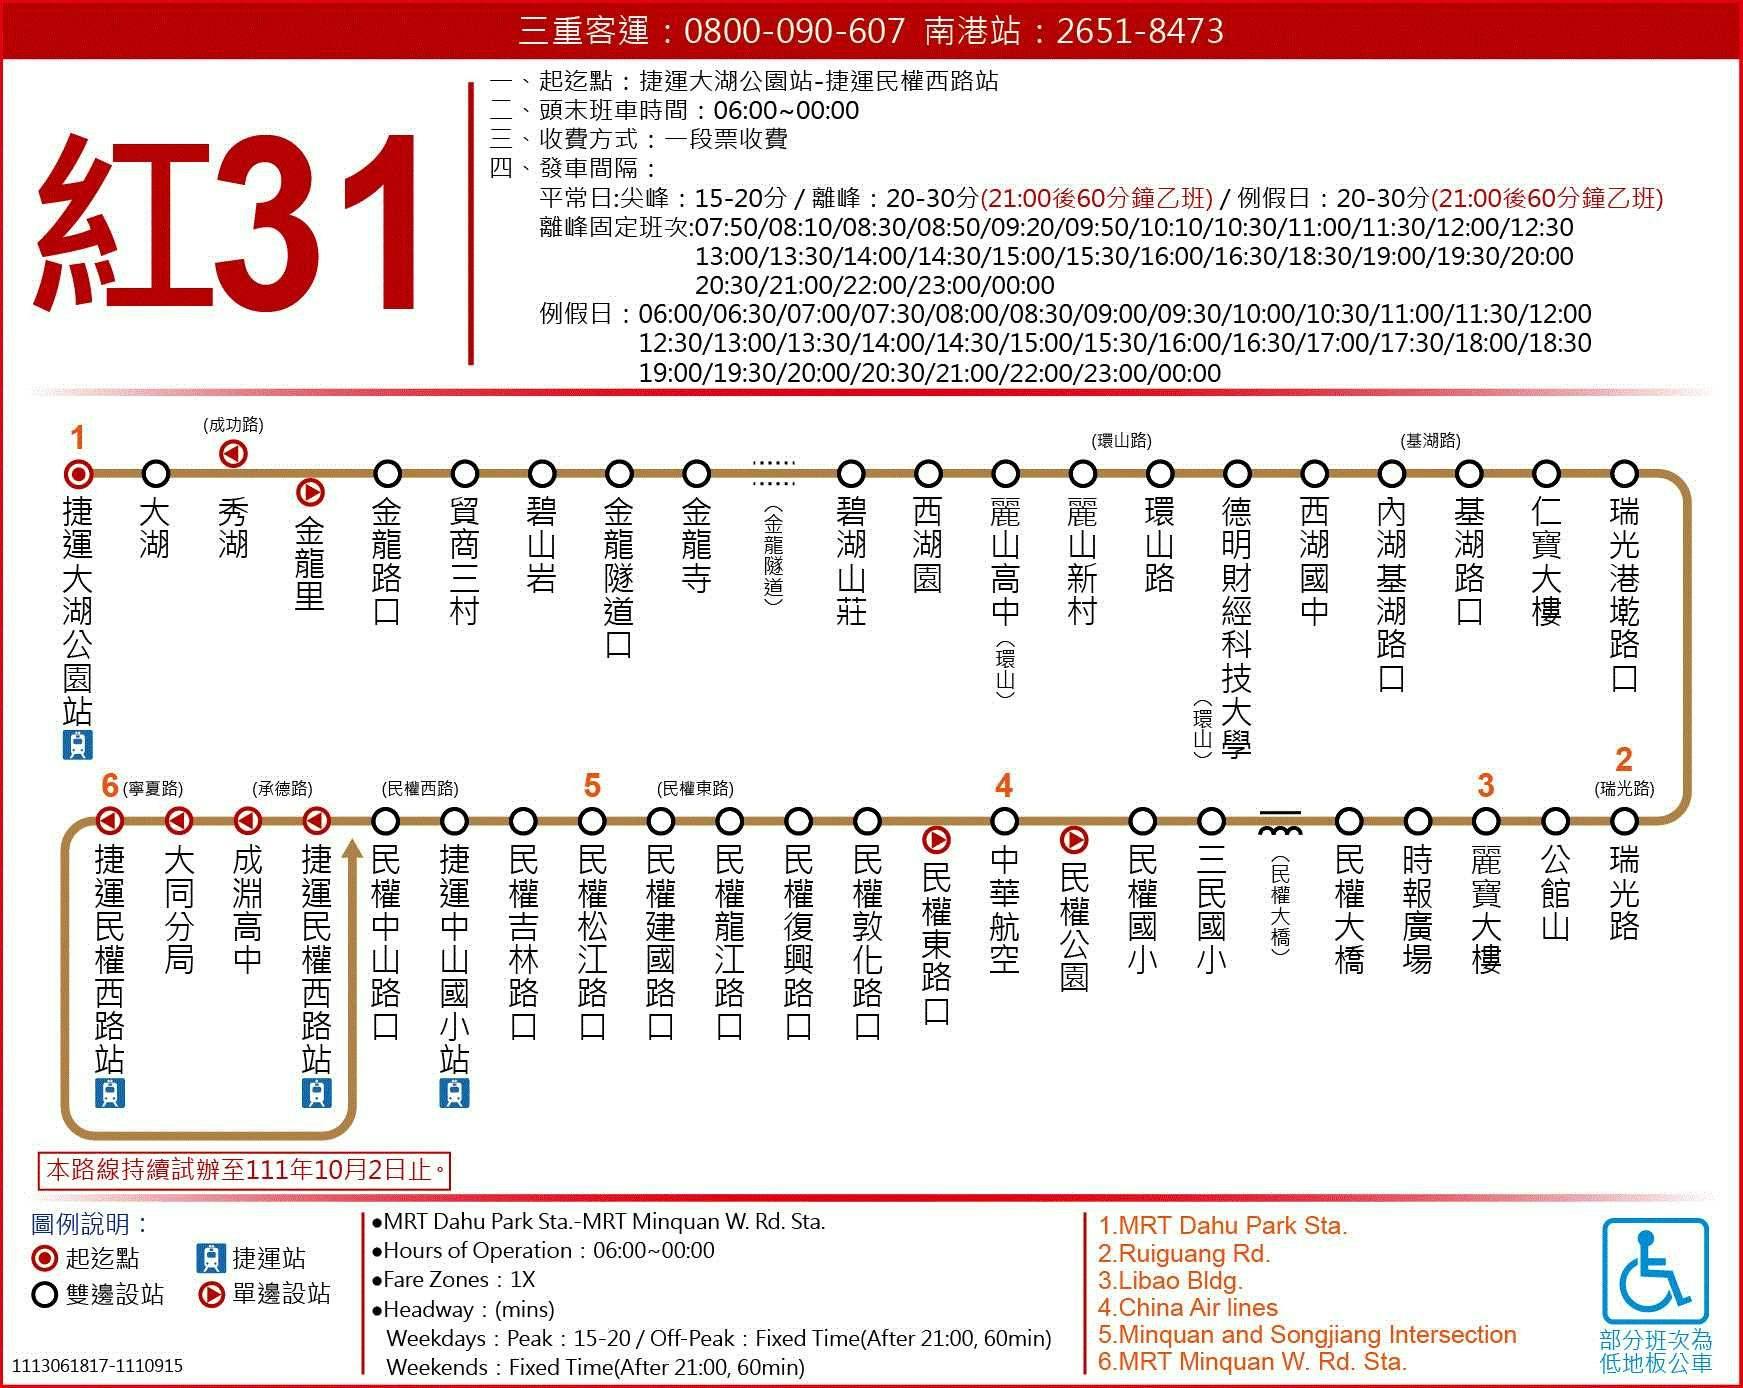 R31Route Map-台北市 Bus